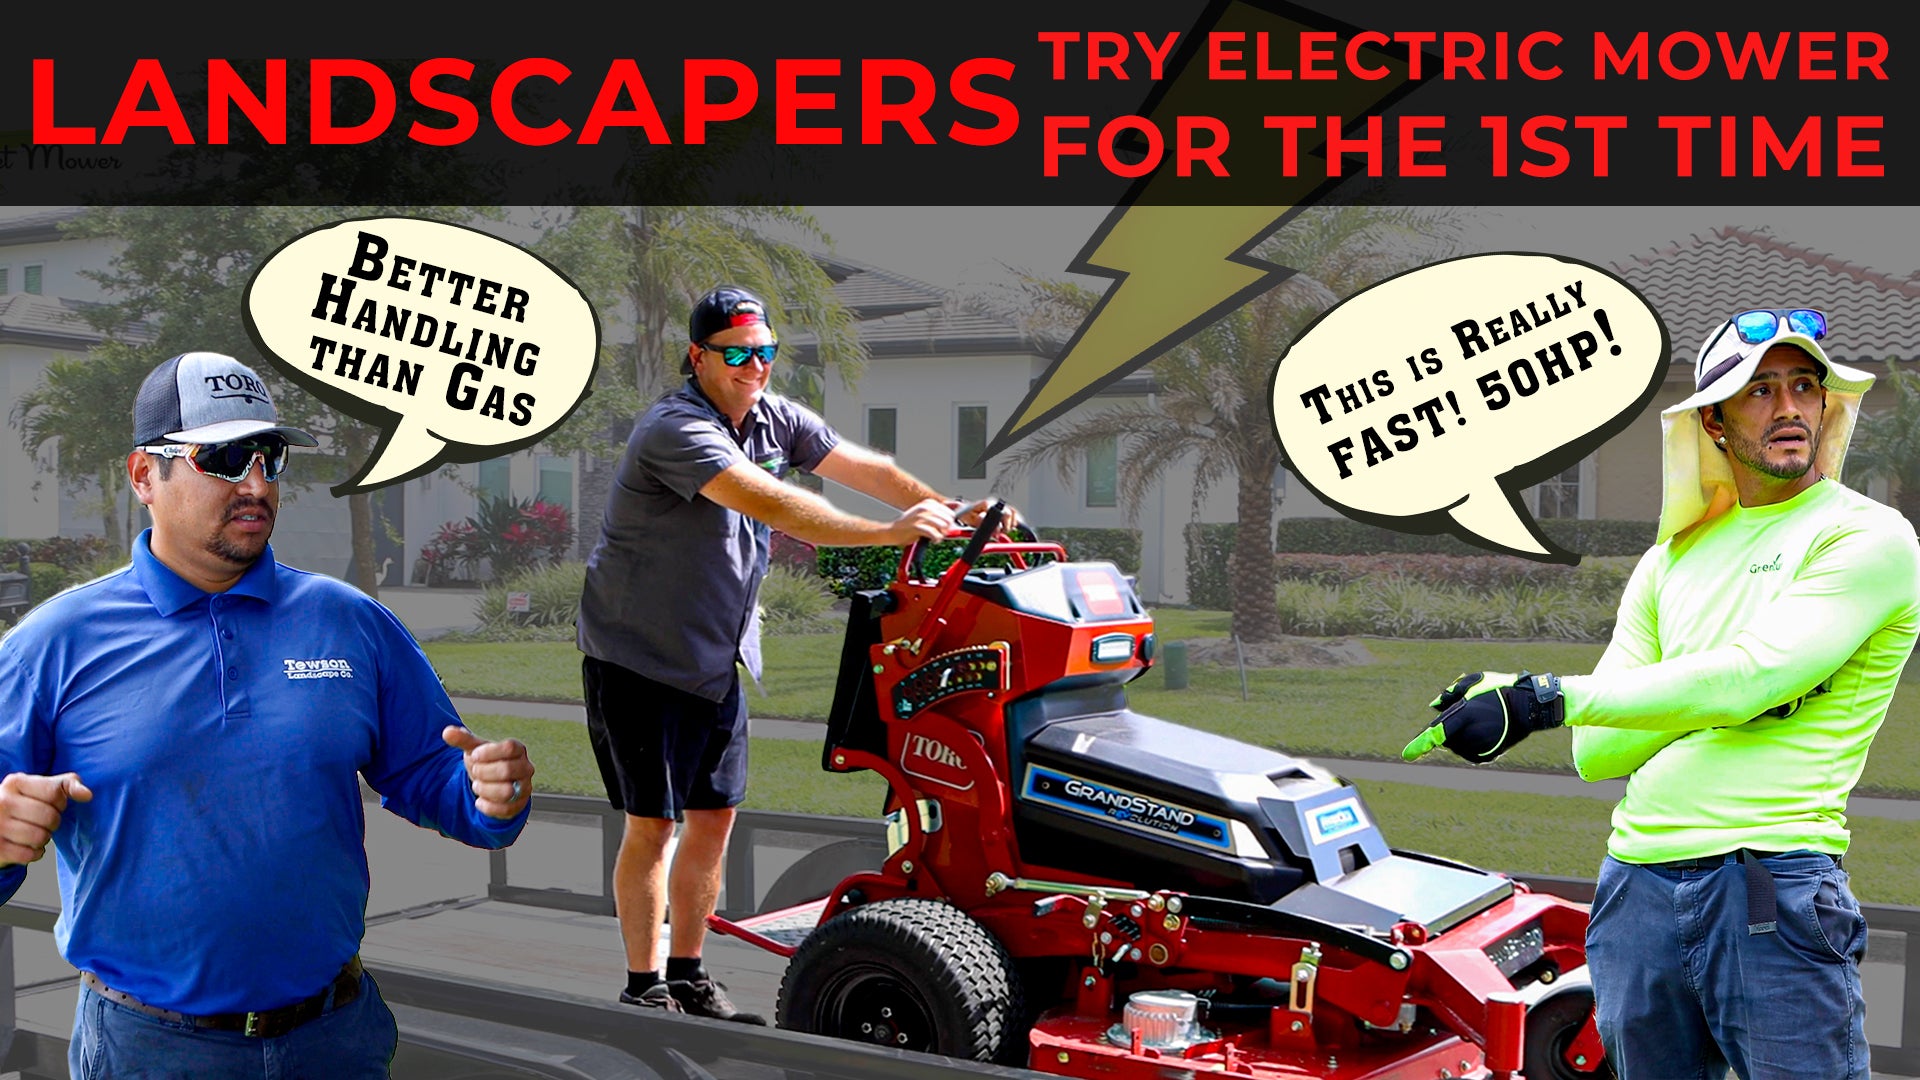 Real People Try ELECTRIC MOWER for the 1st Time - TORO Revolution Grandstand